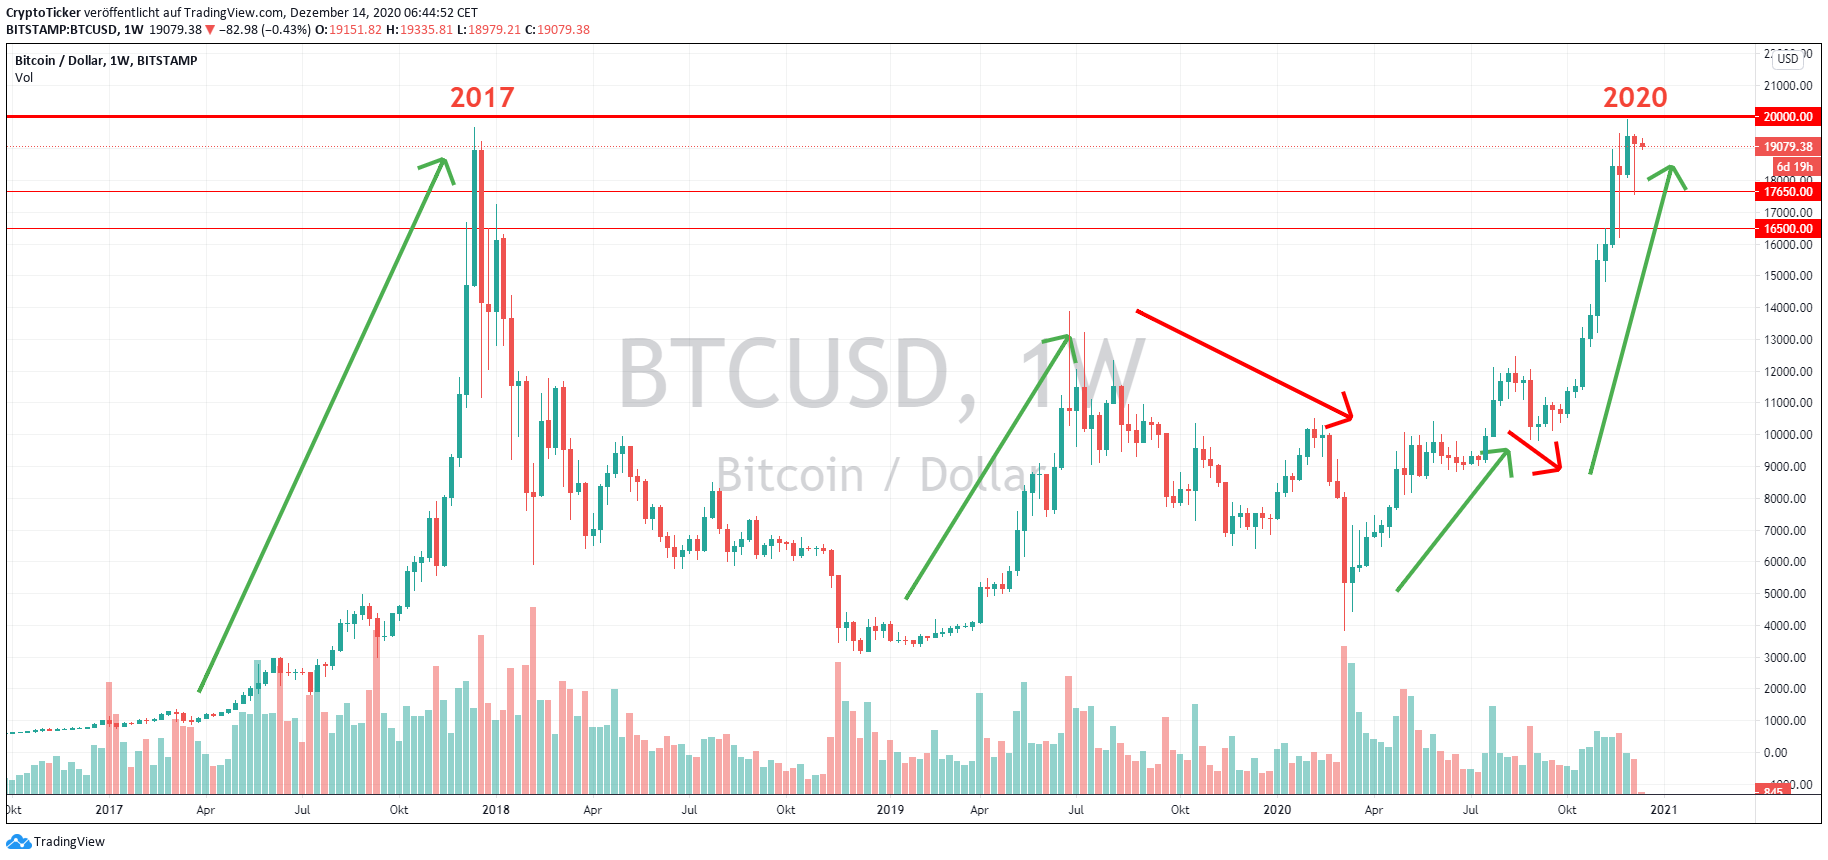 BTC/USD 1-week chart contrasting between 2017 and 2020